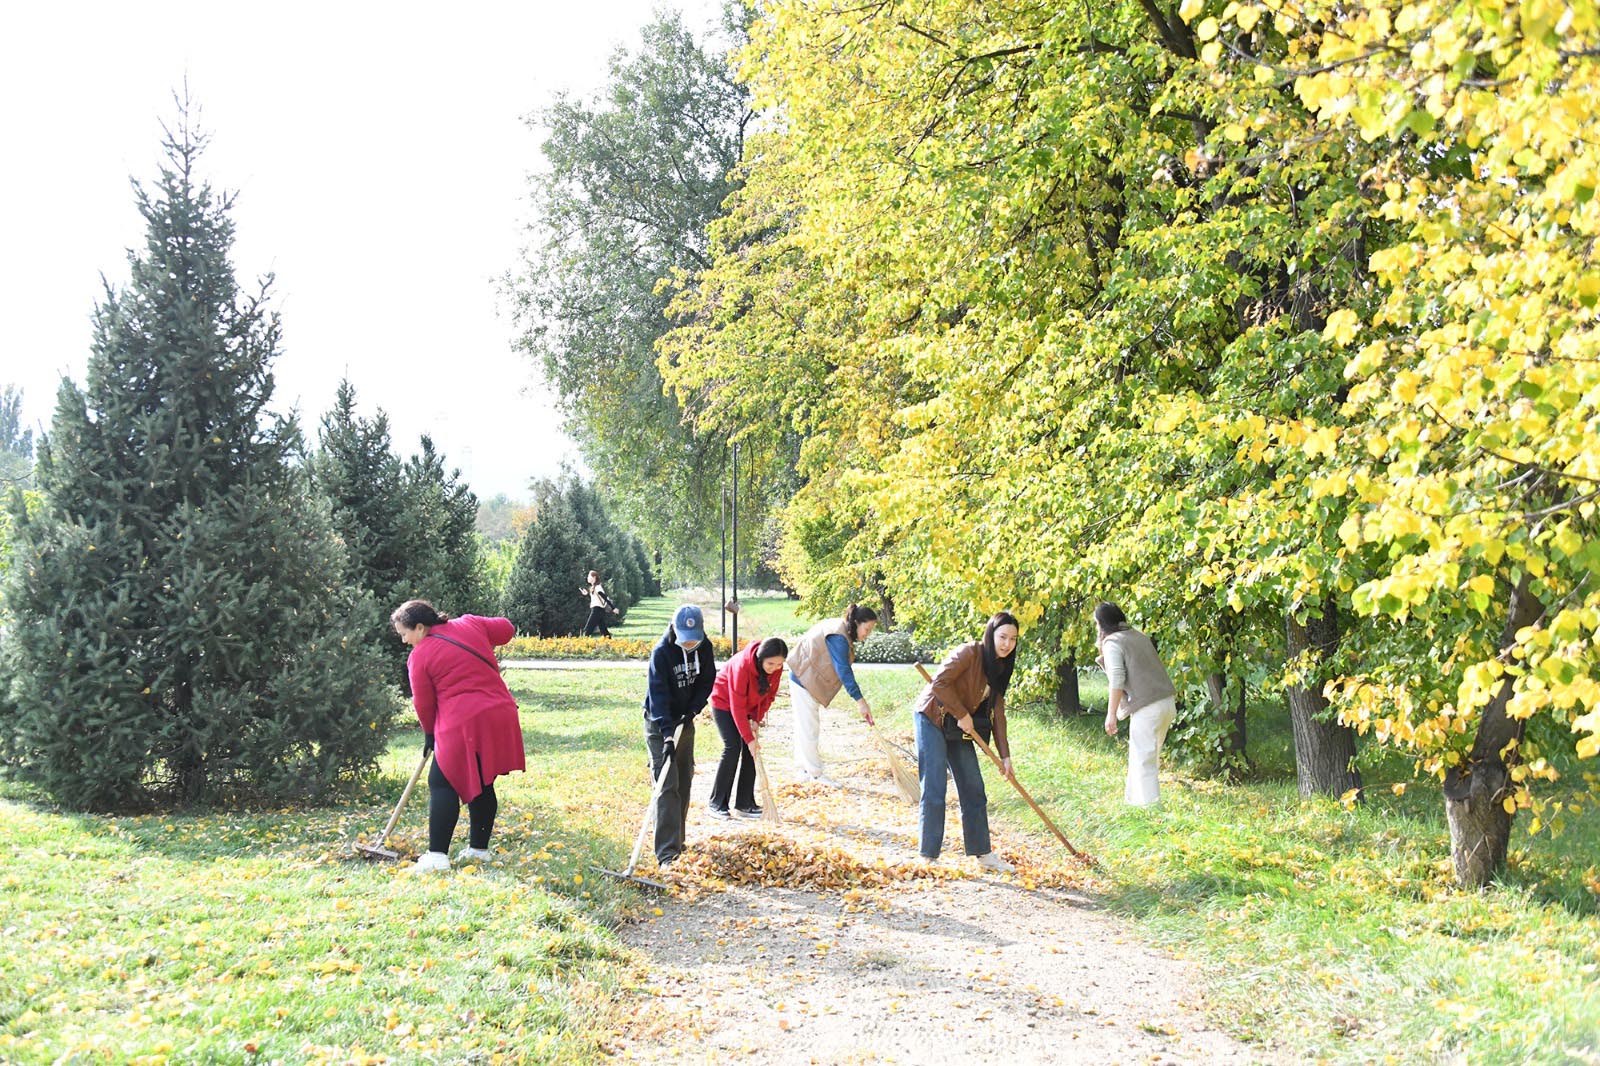 A clean-up day was held in KazNU